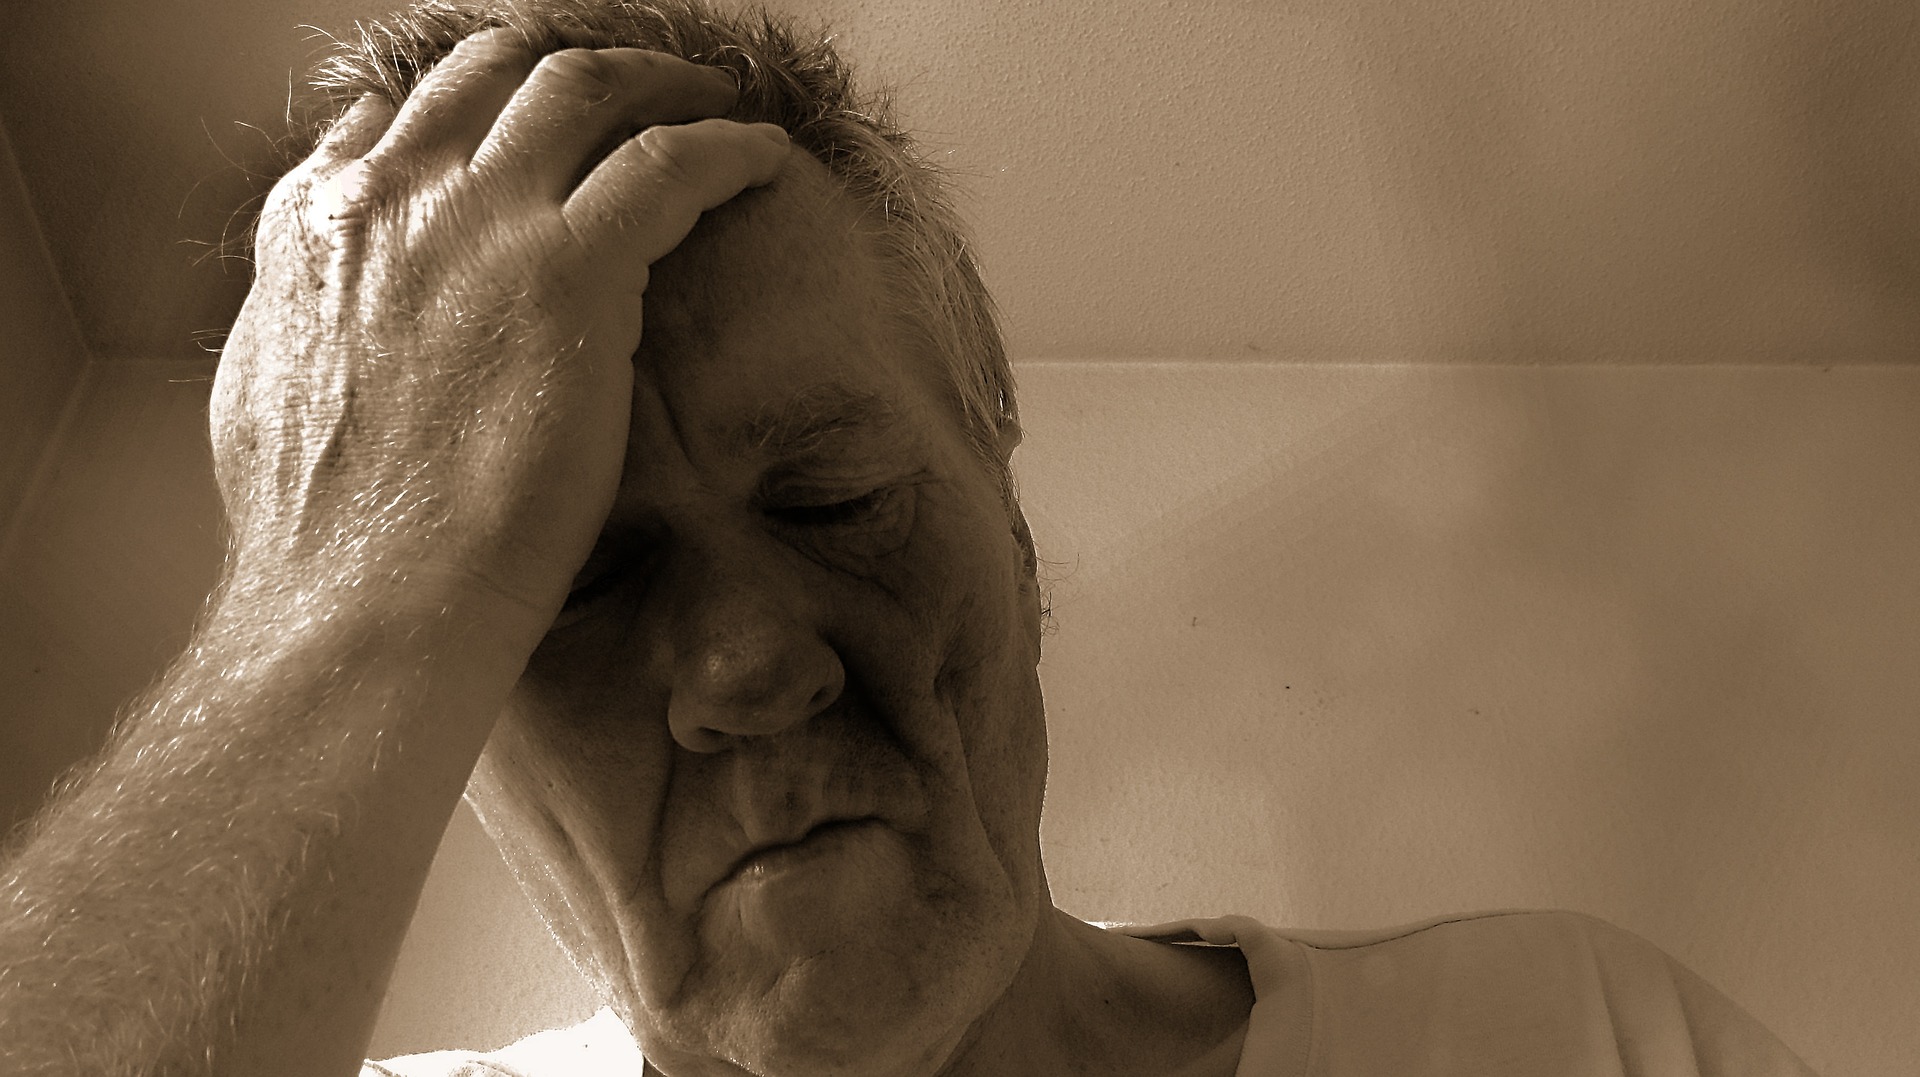 Fatigue in older adults